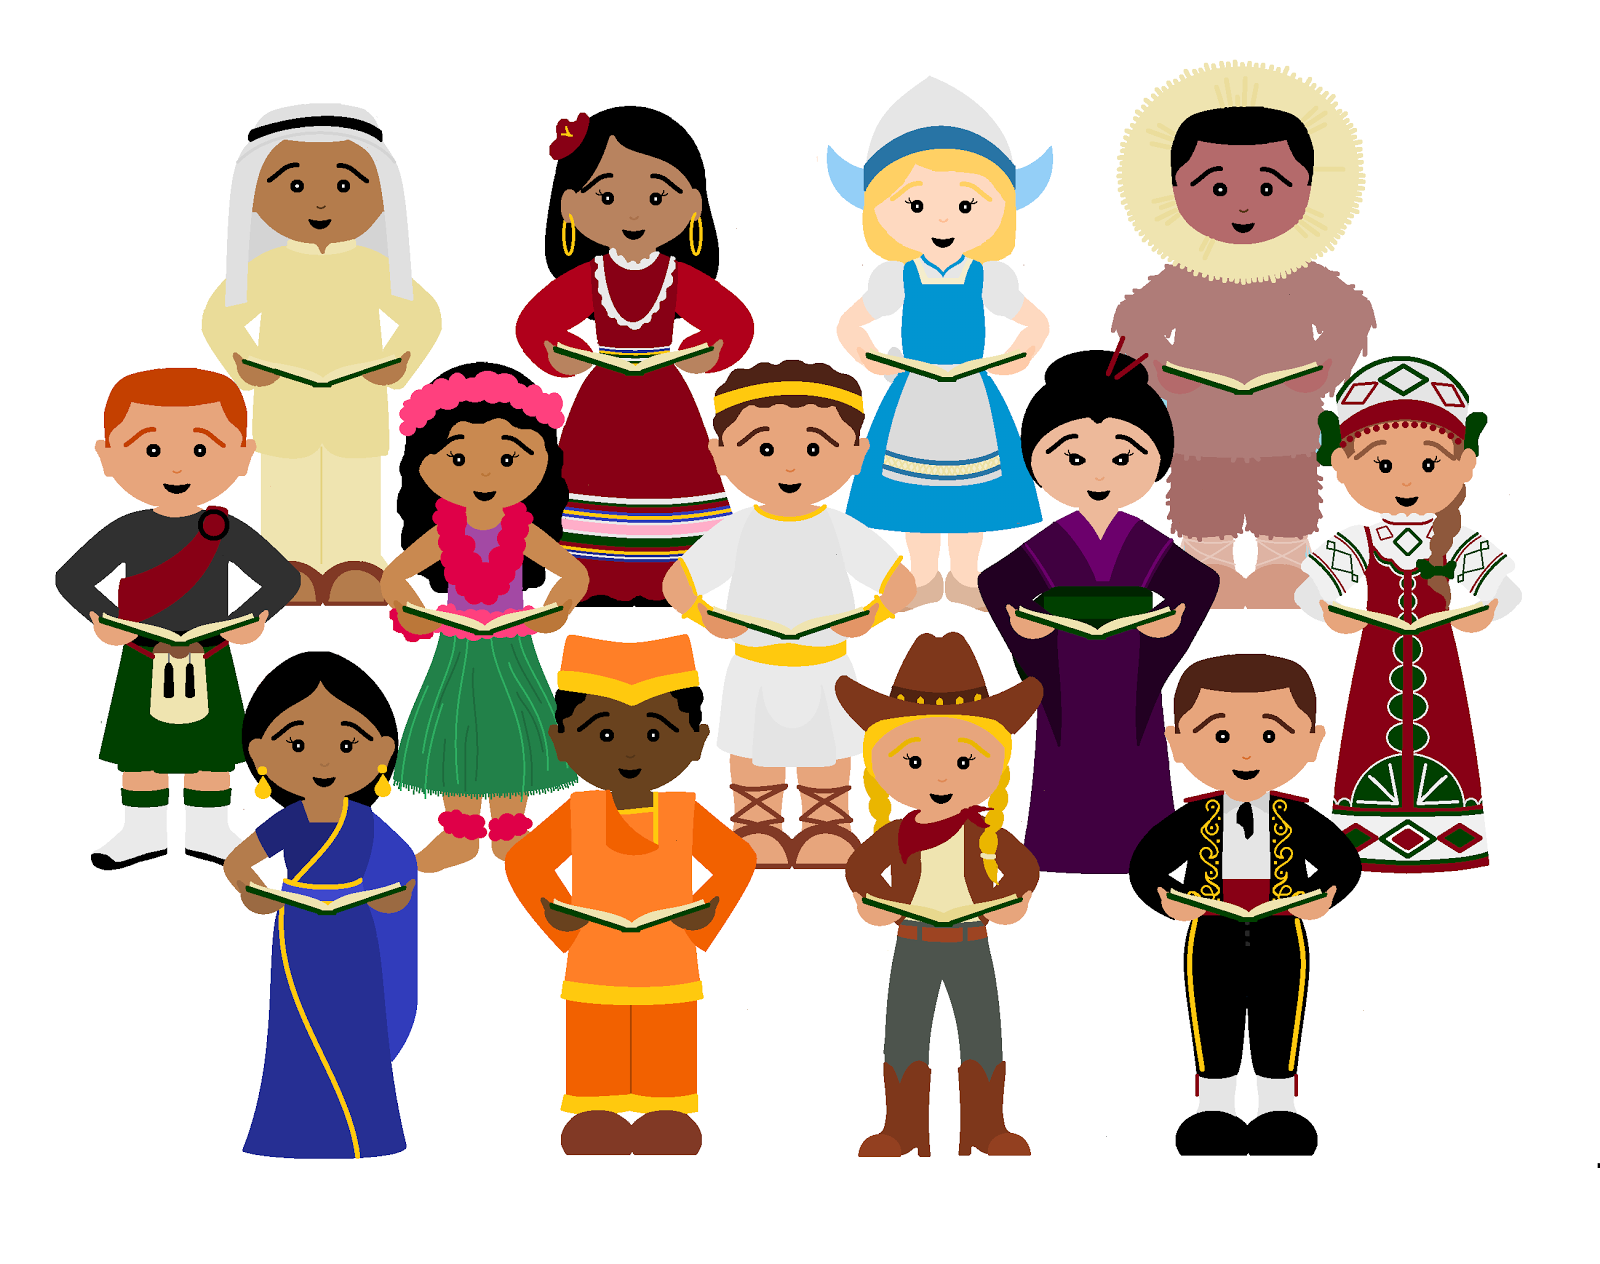 Free Children Of The World Clipart, Download Free Clip Art.